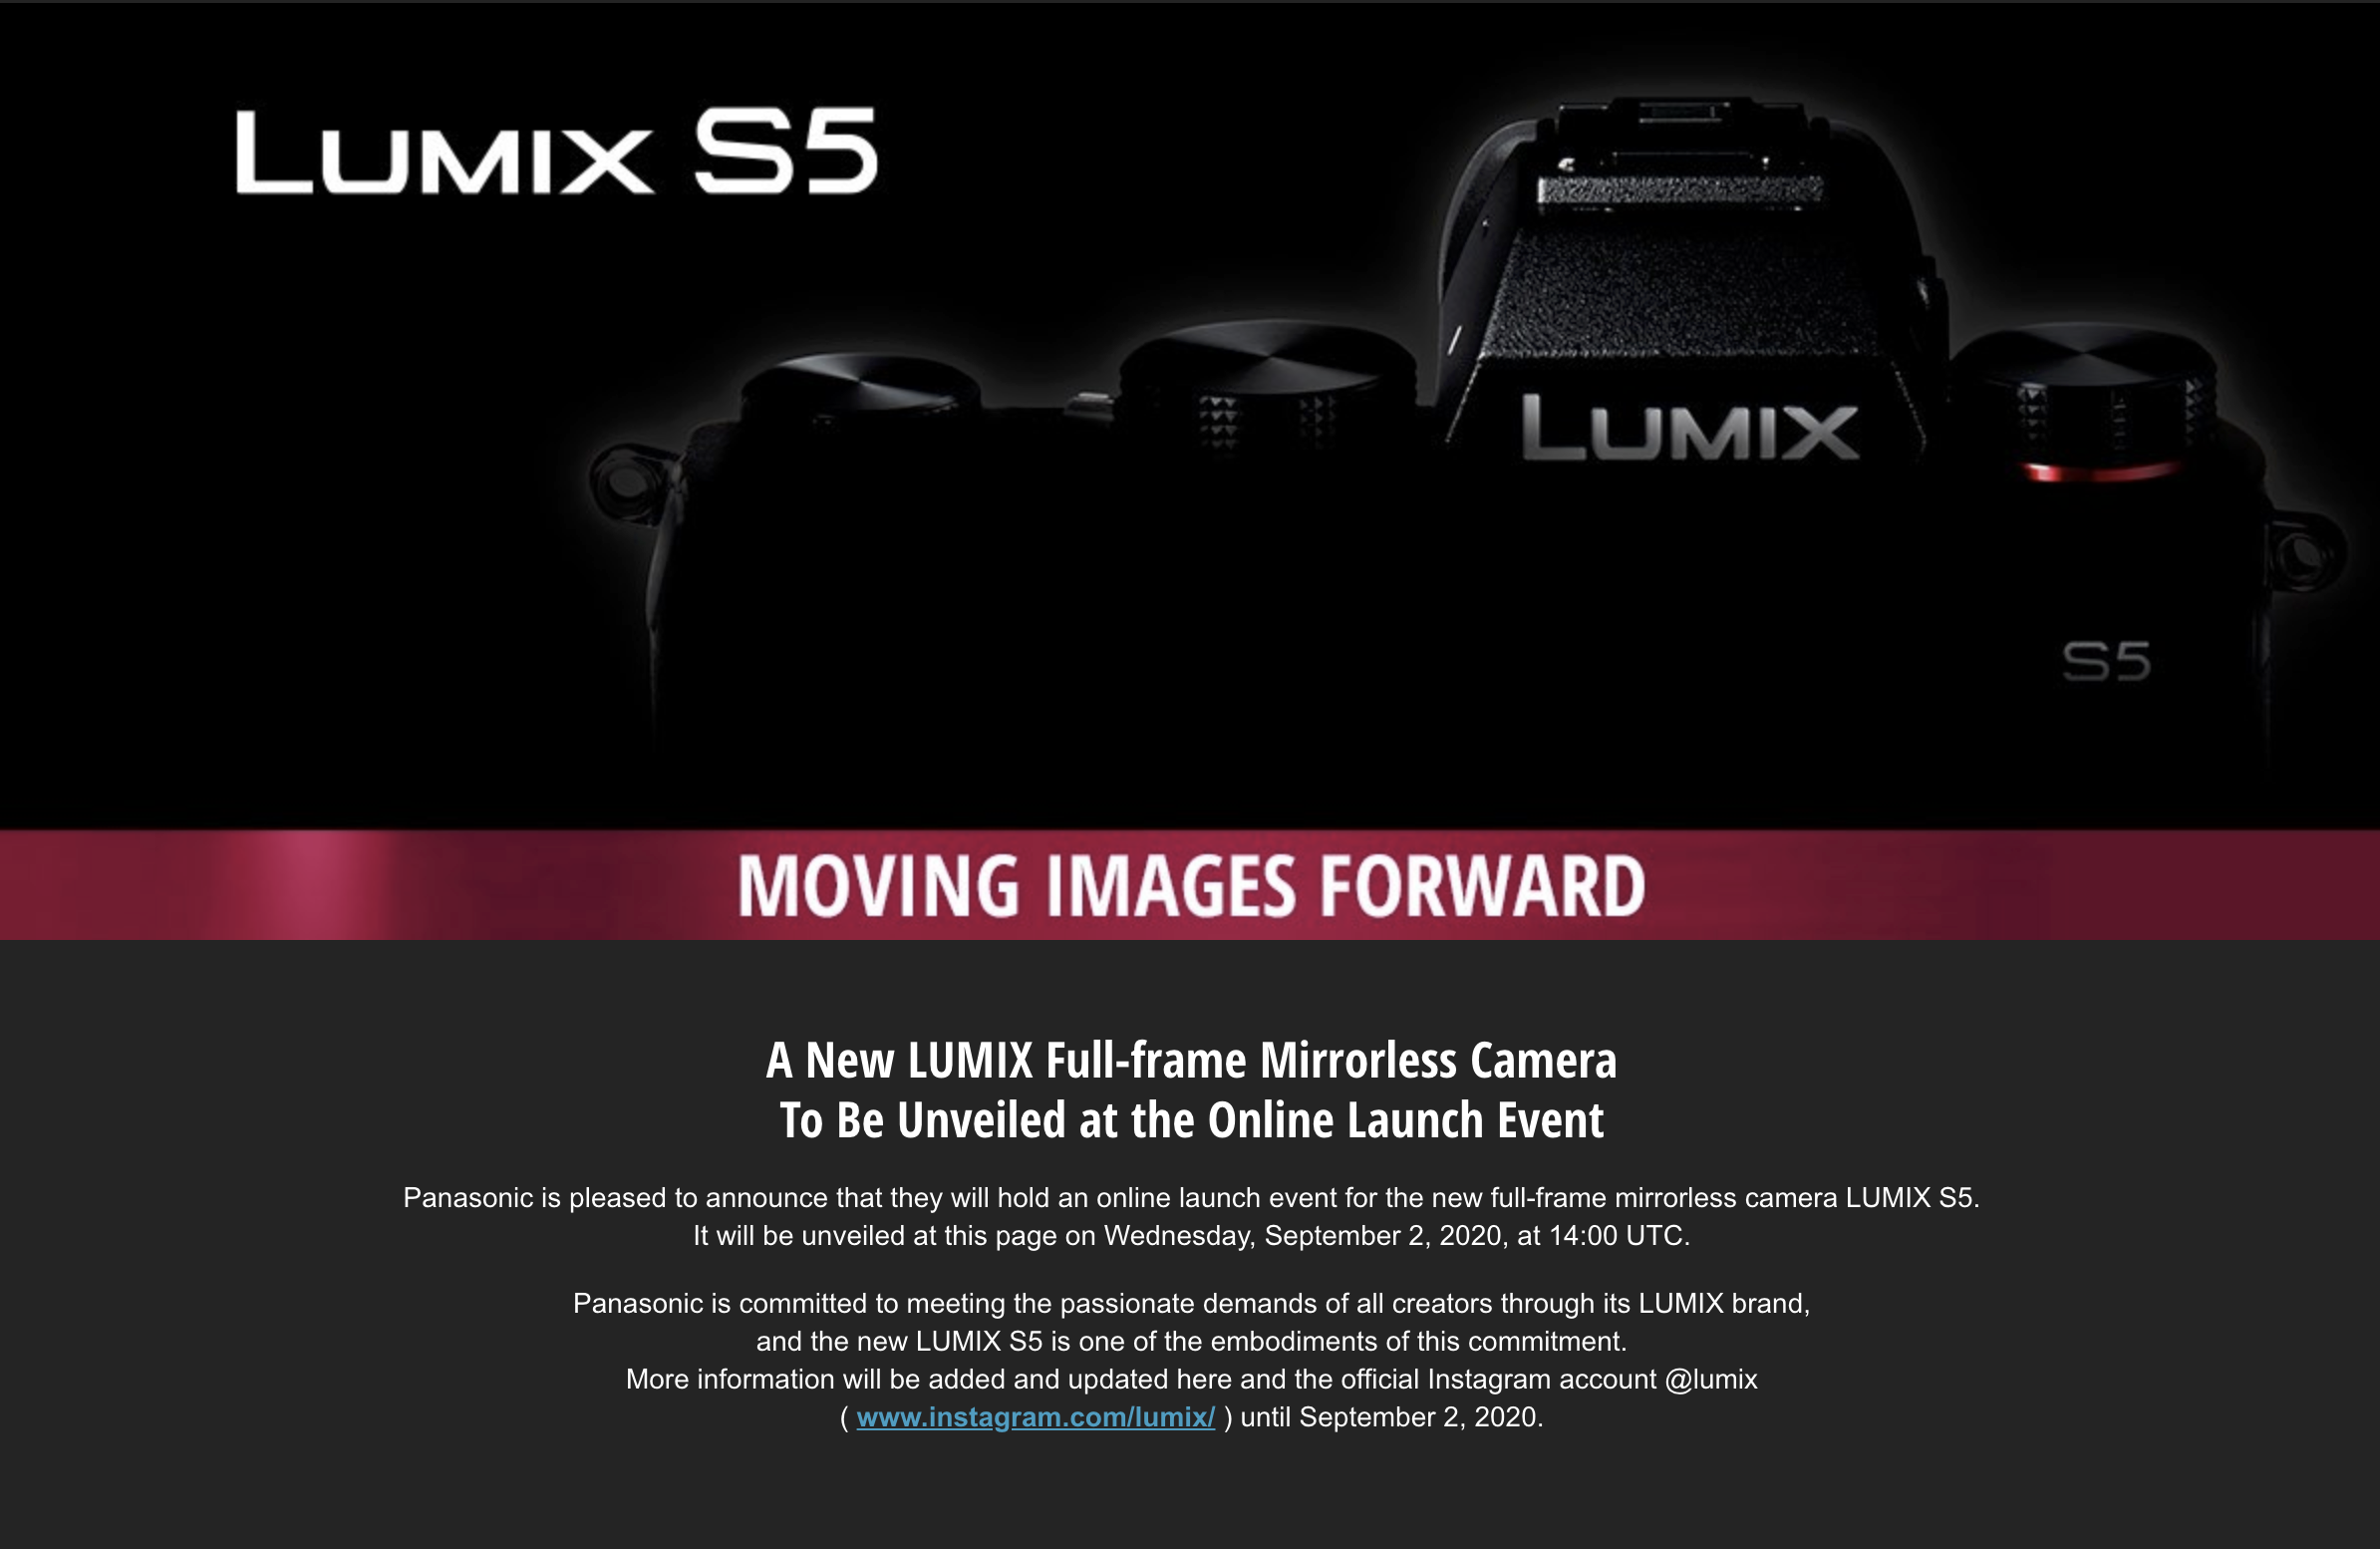 Will the New Lumix S5 Signal The End of Panasonic’s M4/3 Journey?